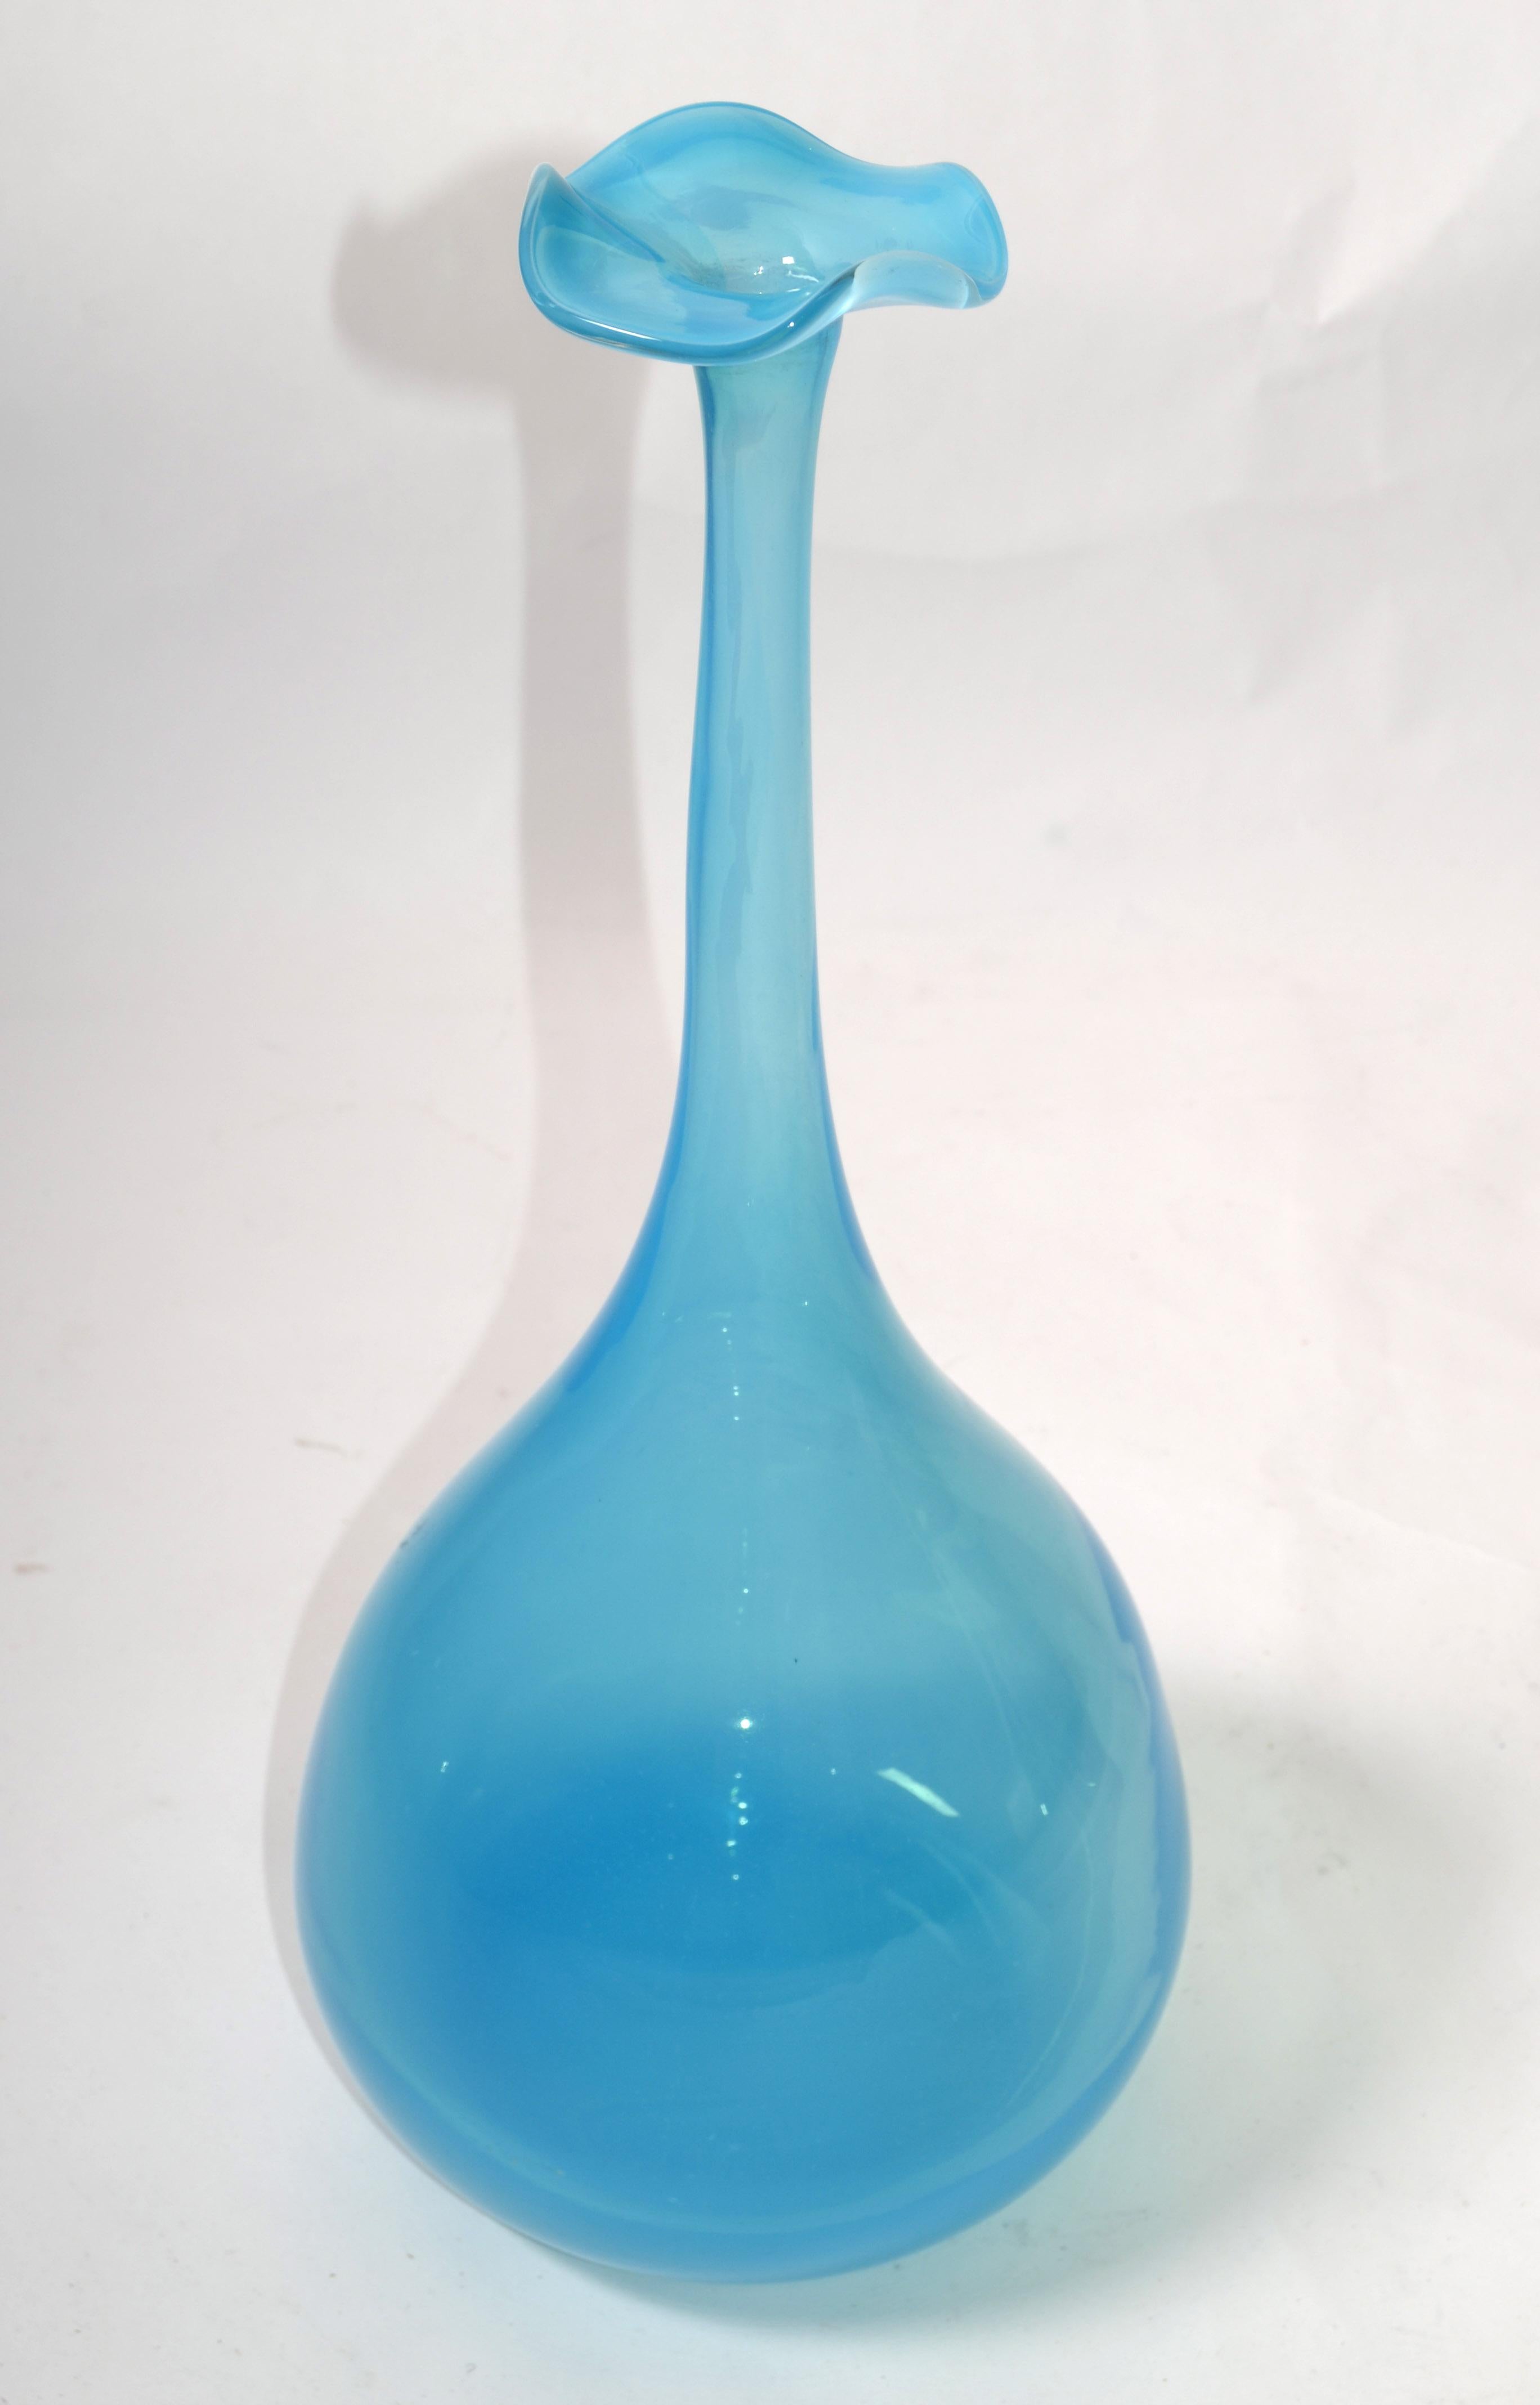 Mid-Century Modern blue long neck bottle, art glass weed vase in the Style of Kjell Engman attributed to Kosta Boda made in Sweden.
Lead-free crystal in sky blue color. Great Gift idea or as a single Vase on any Table Setting.
The Opening